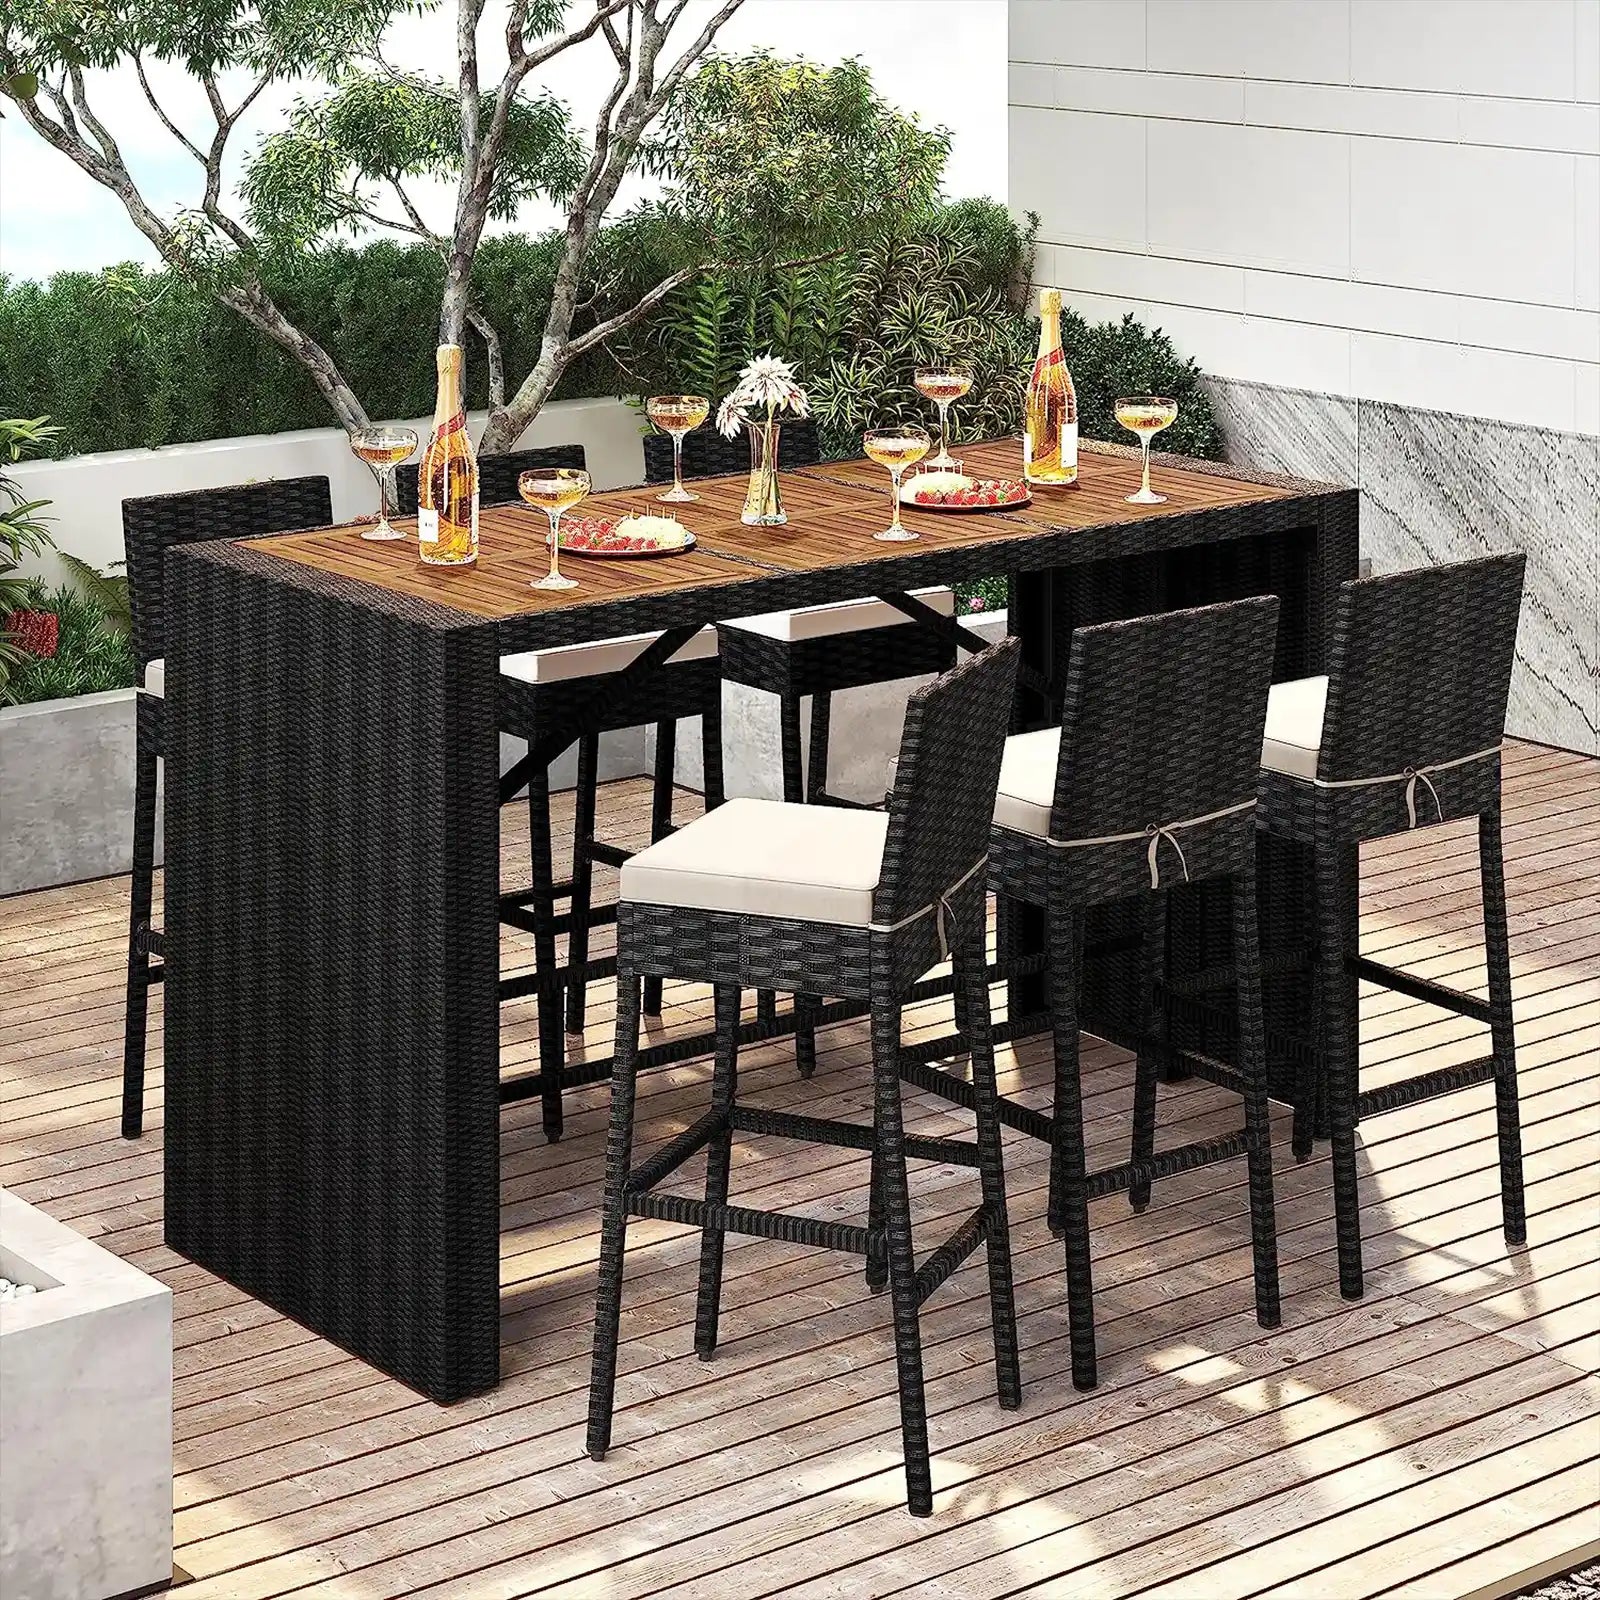 7 Piece Patio Dining Set Outdoor Acacia Wood Bar Table and Barstool Chairs with Removable Cushions, Patio Wicker Furniture Set for Deck, Backyard, Garden